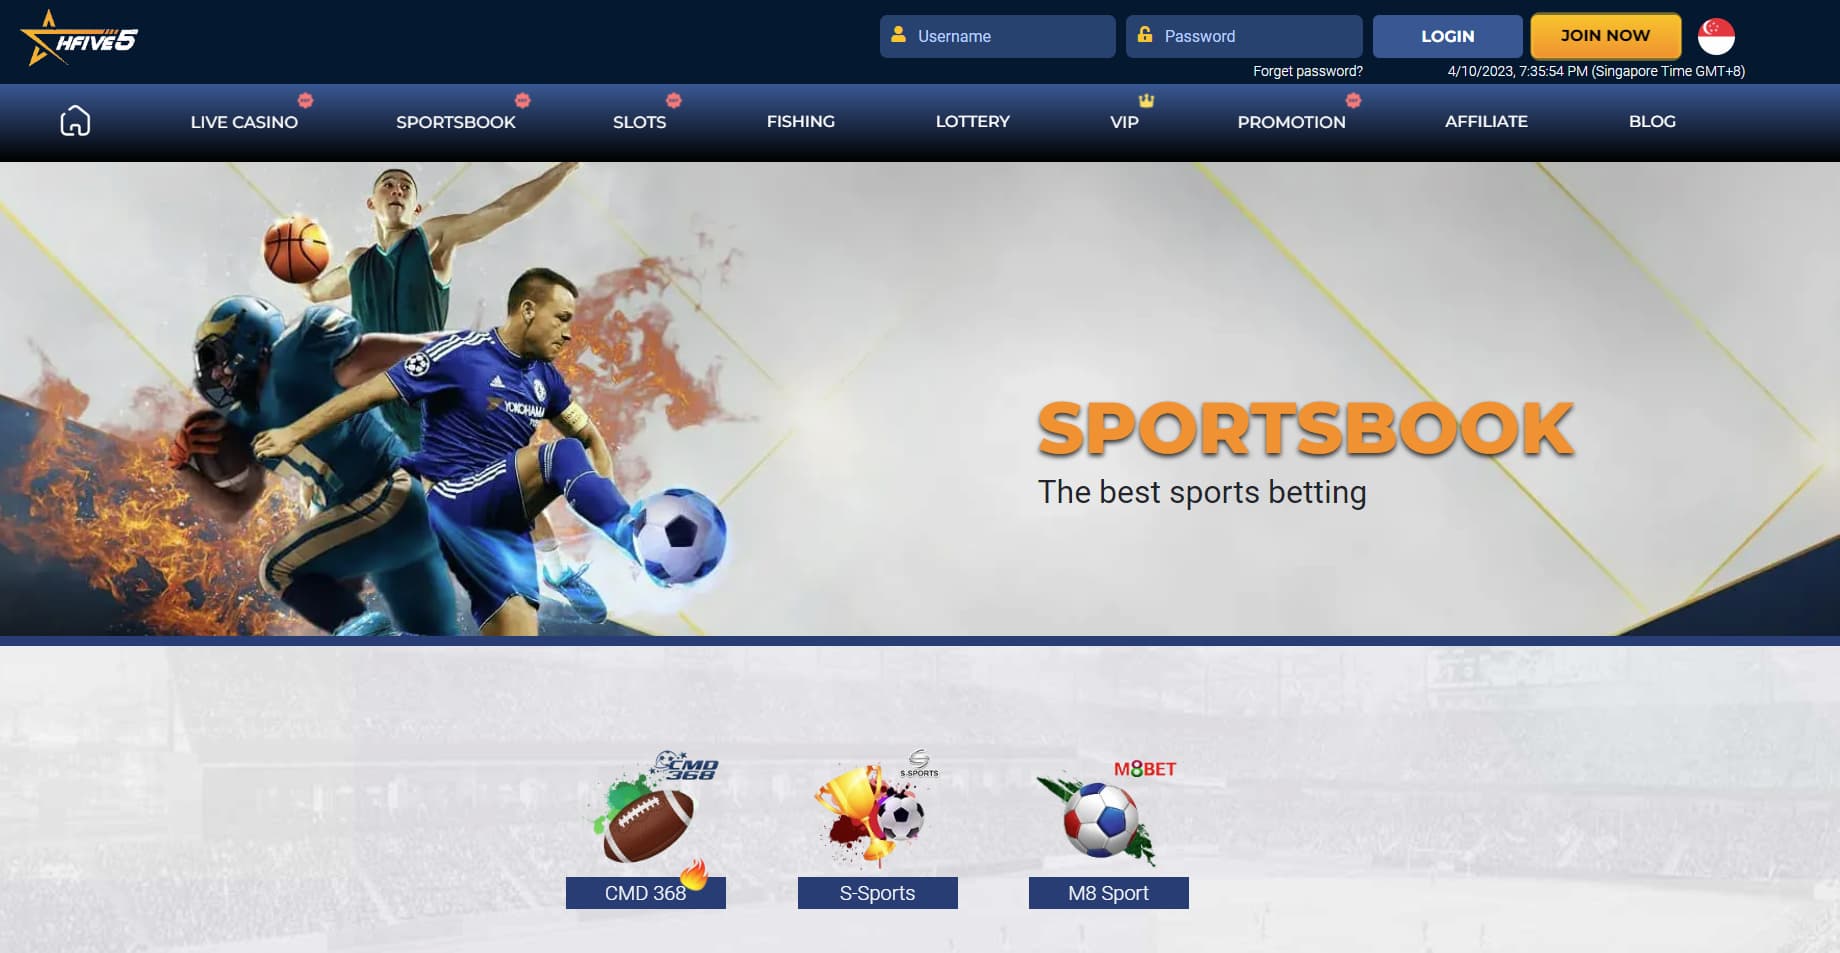 hifive5 sportsbook for Malaysia